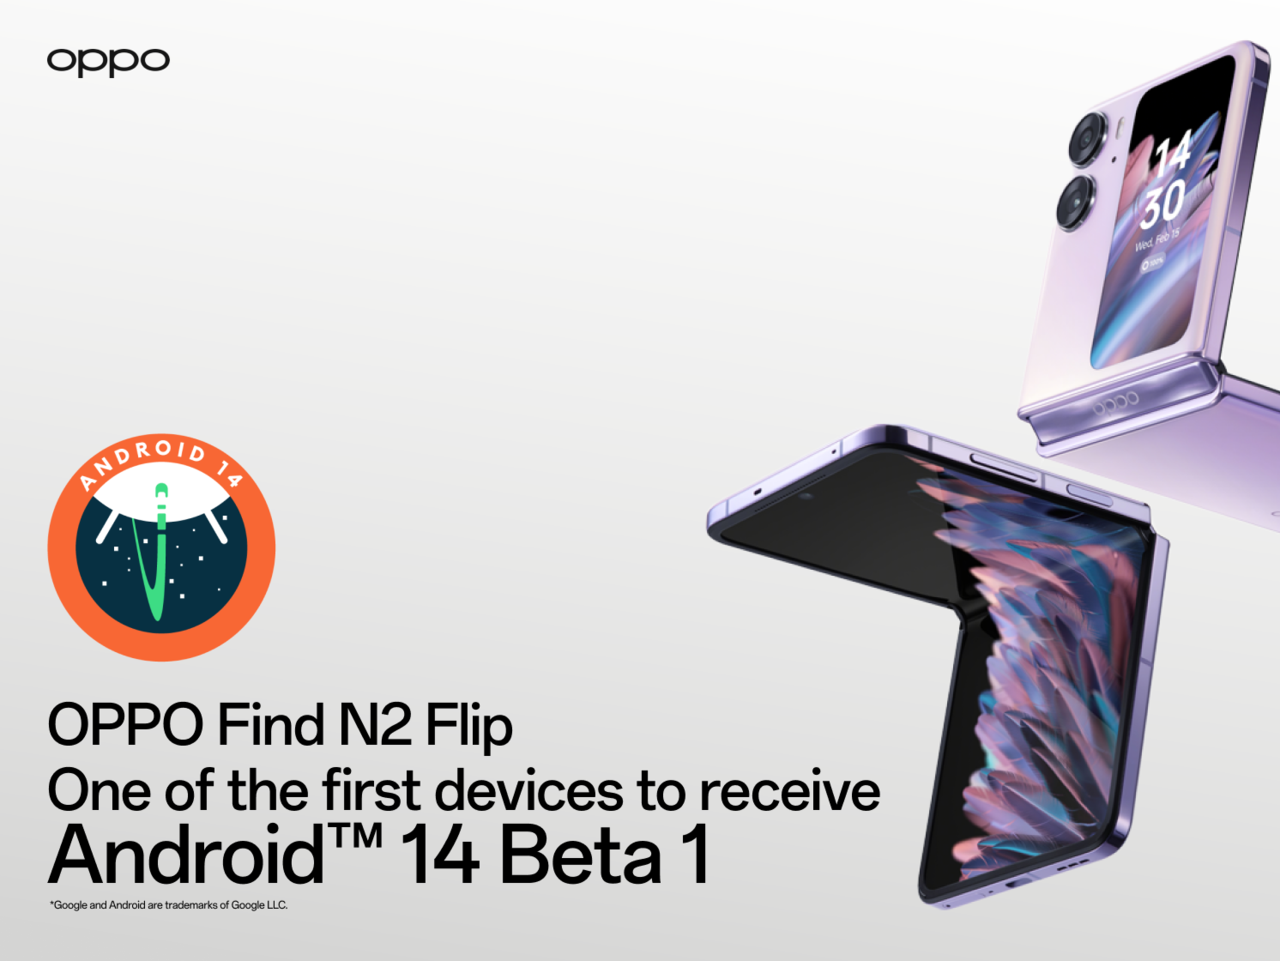 OPPO Find N2 Flip Android 14 Beta 1